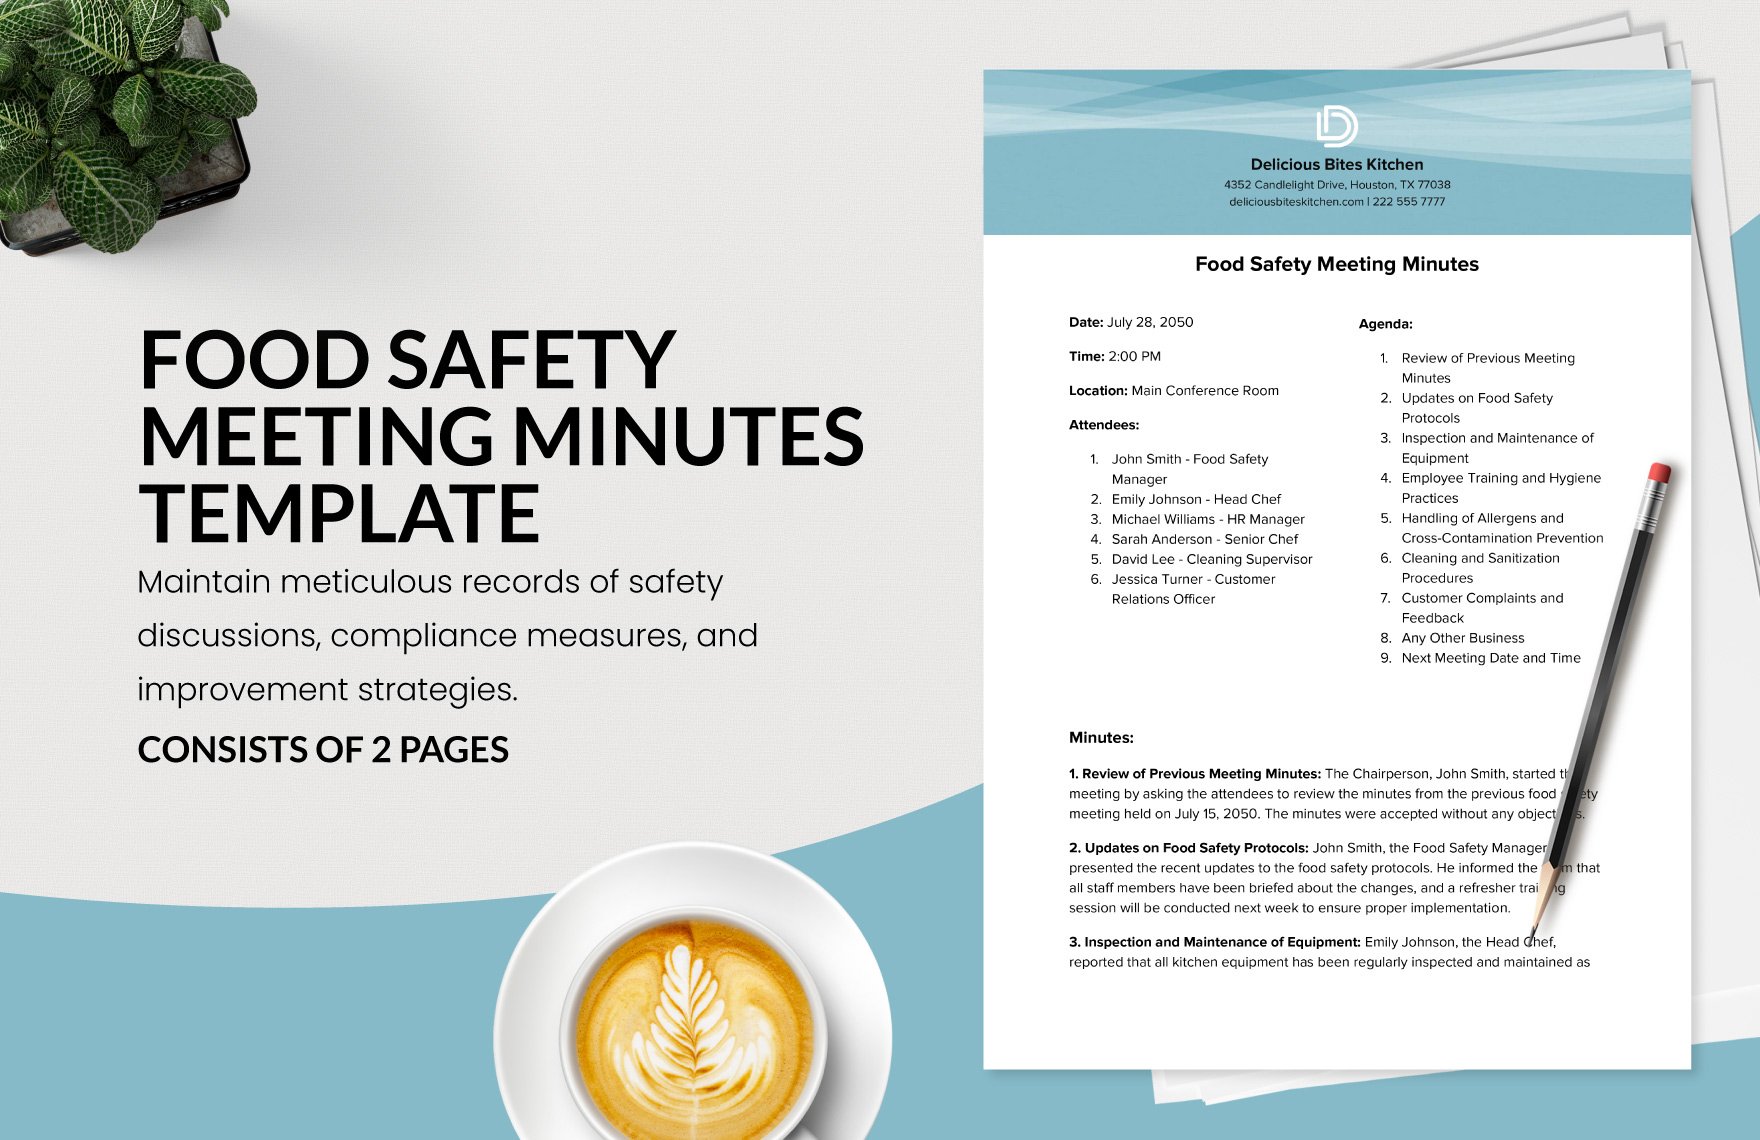 Food Safety Meeting Minutes Template